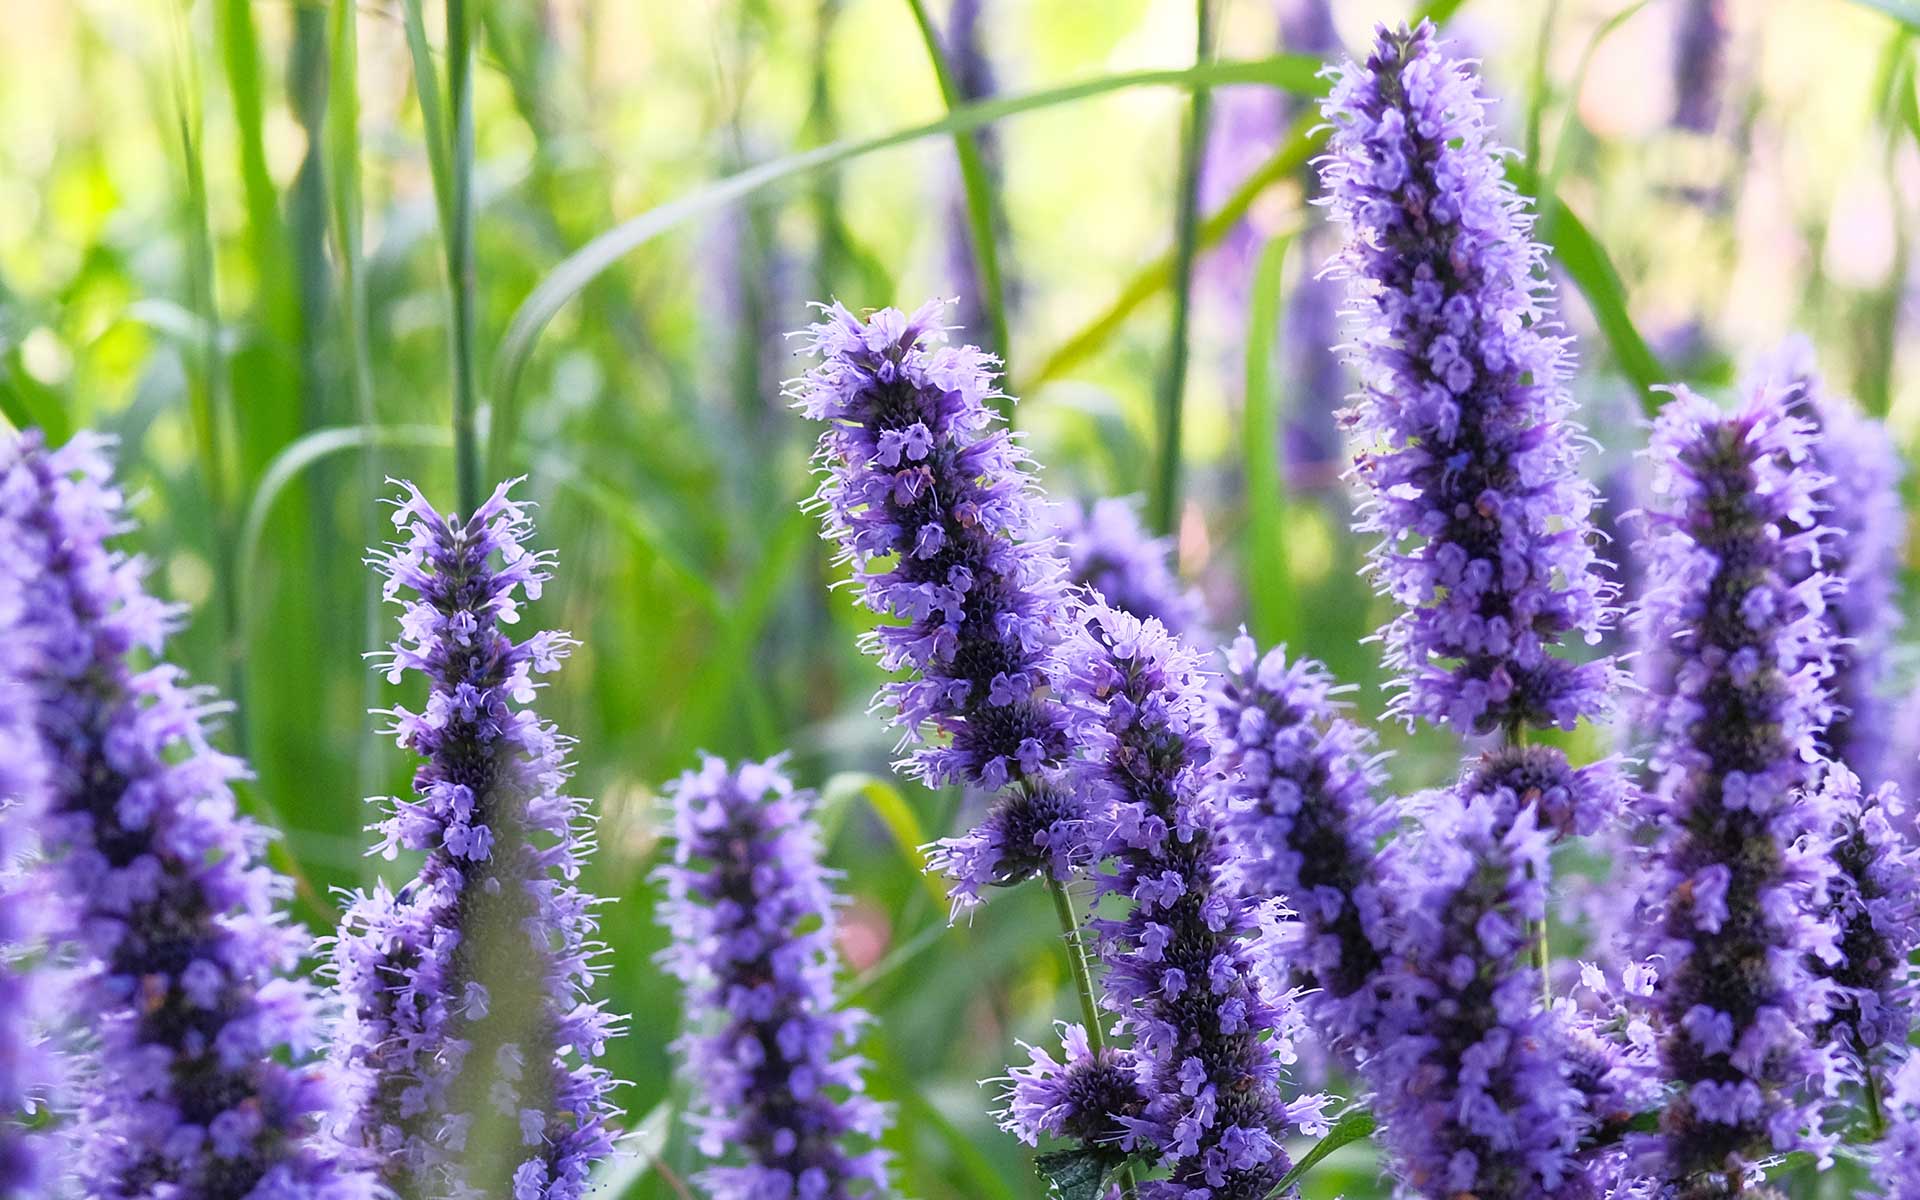 Hyssop Plant - The Sacred Herb